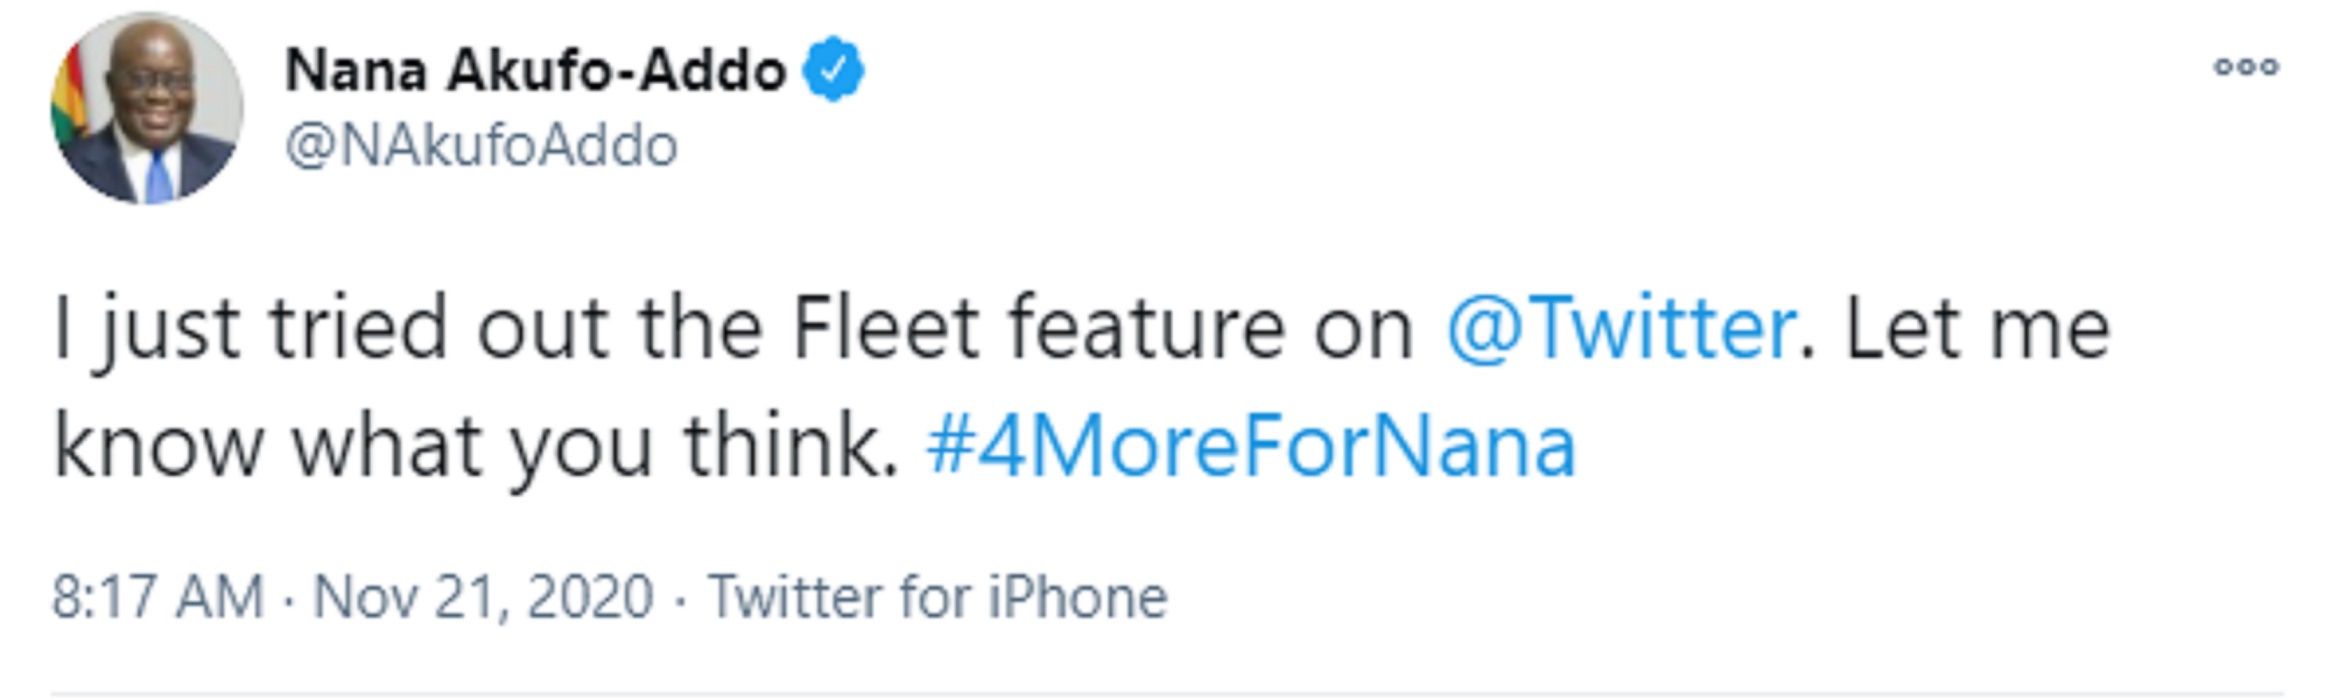 Twitter burns with reactions as Nana Addo tries fleet feature